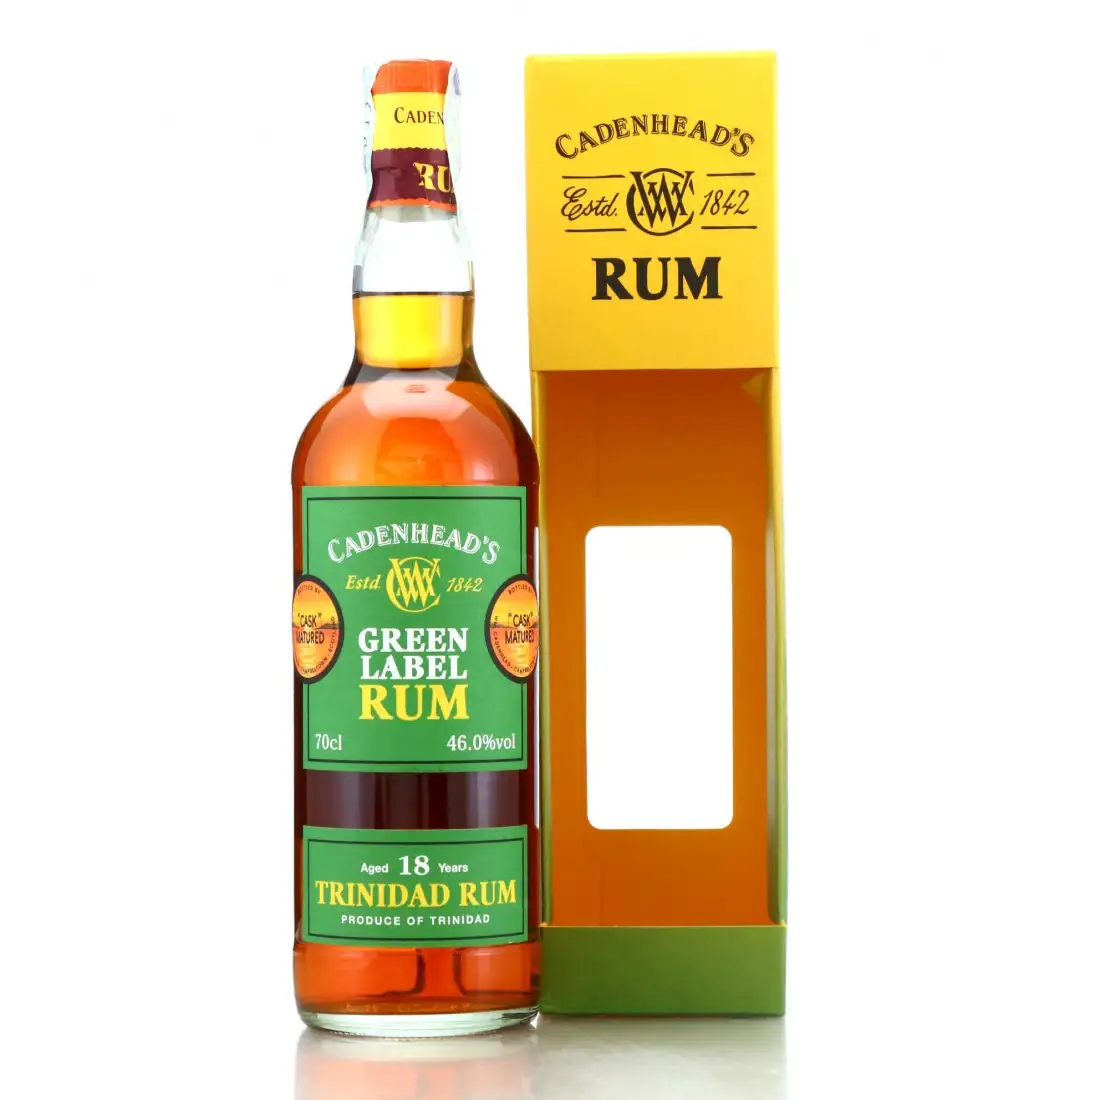 Image of the front of the bottle of the rum Green Label Trinidad Rum